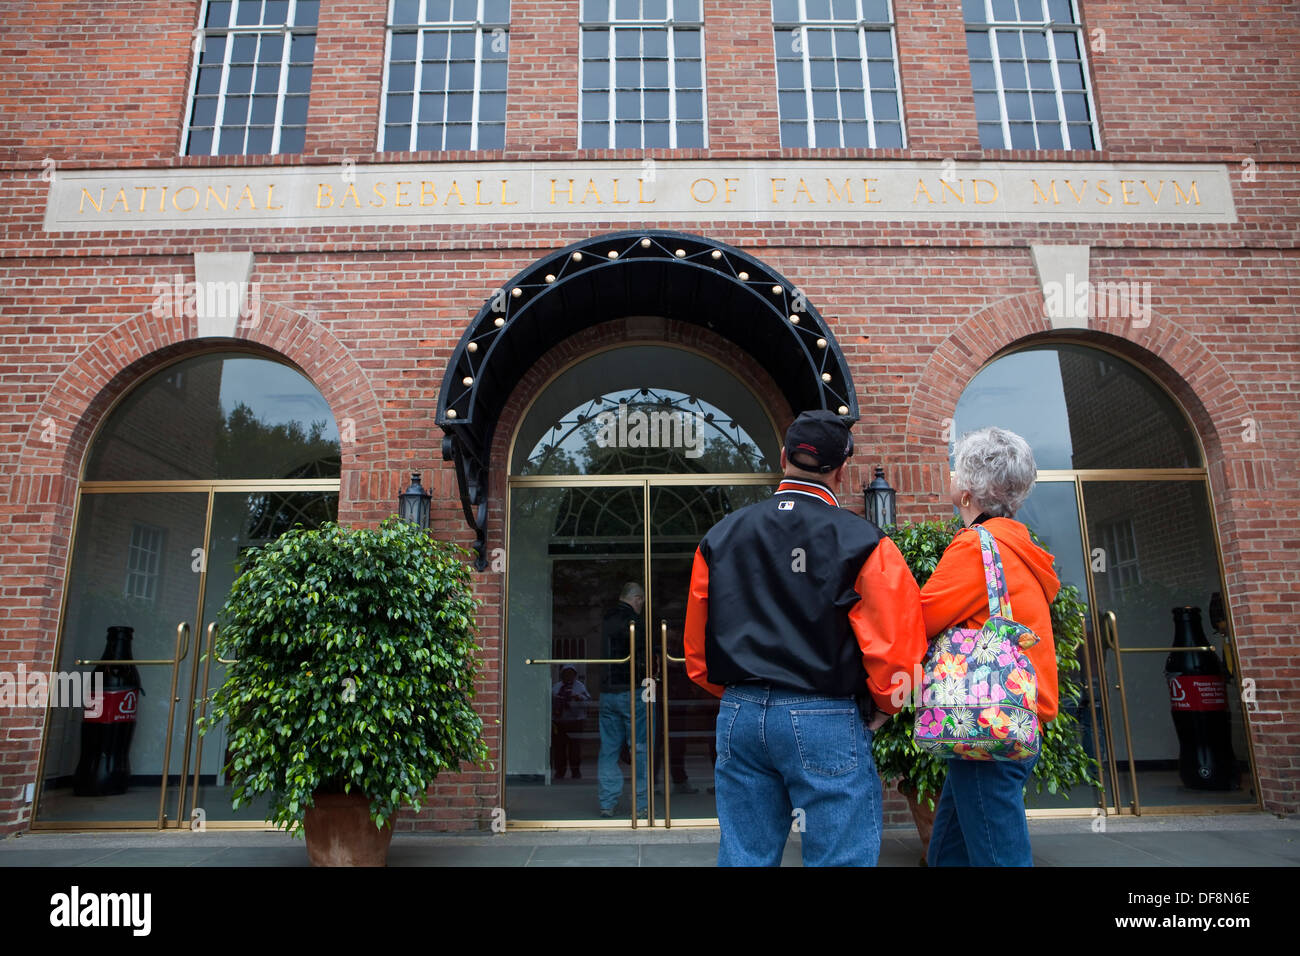 Das National Baseball Hall Of Fame and Museum ist in Cooperstown, New York abgebildet Stockfoto